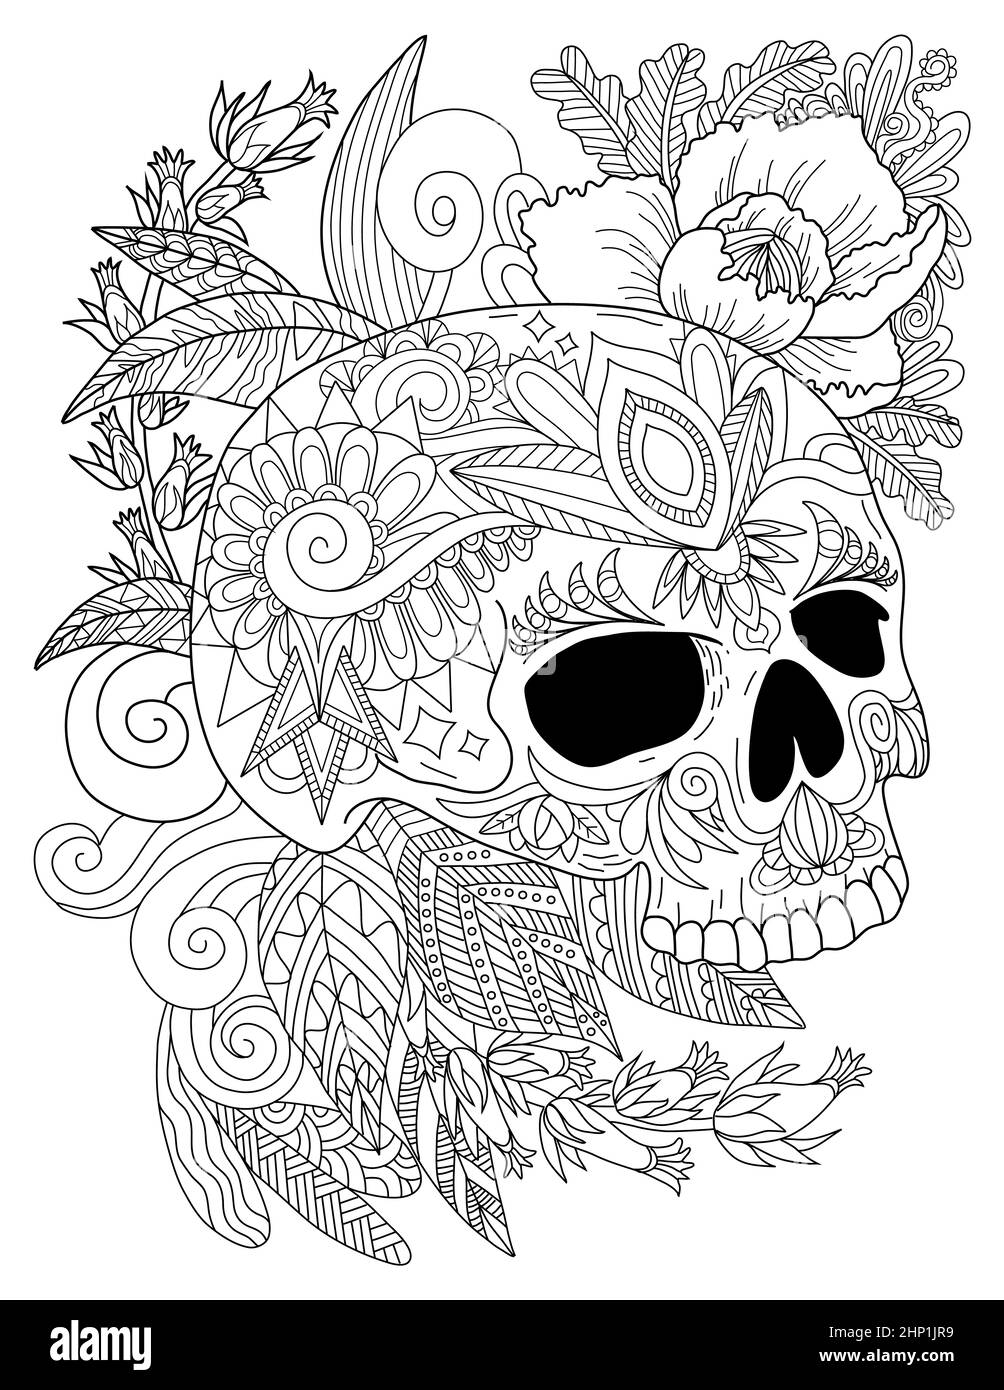 Skull Tattoo Drawing Surrounded By Roses In Side View Looking Down. Stock Photo